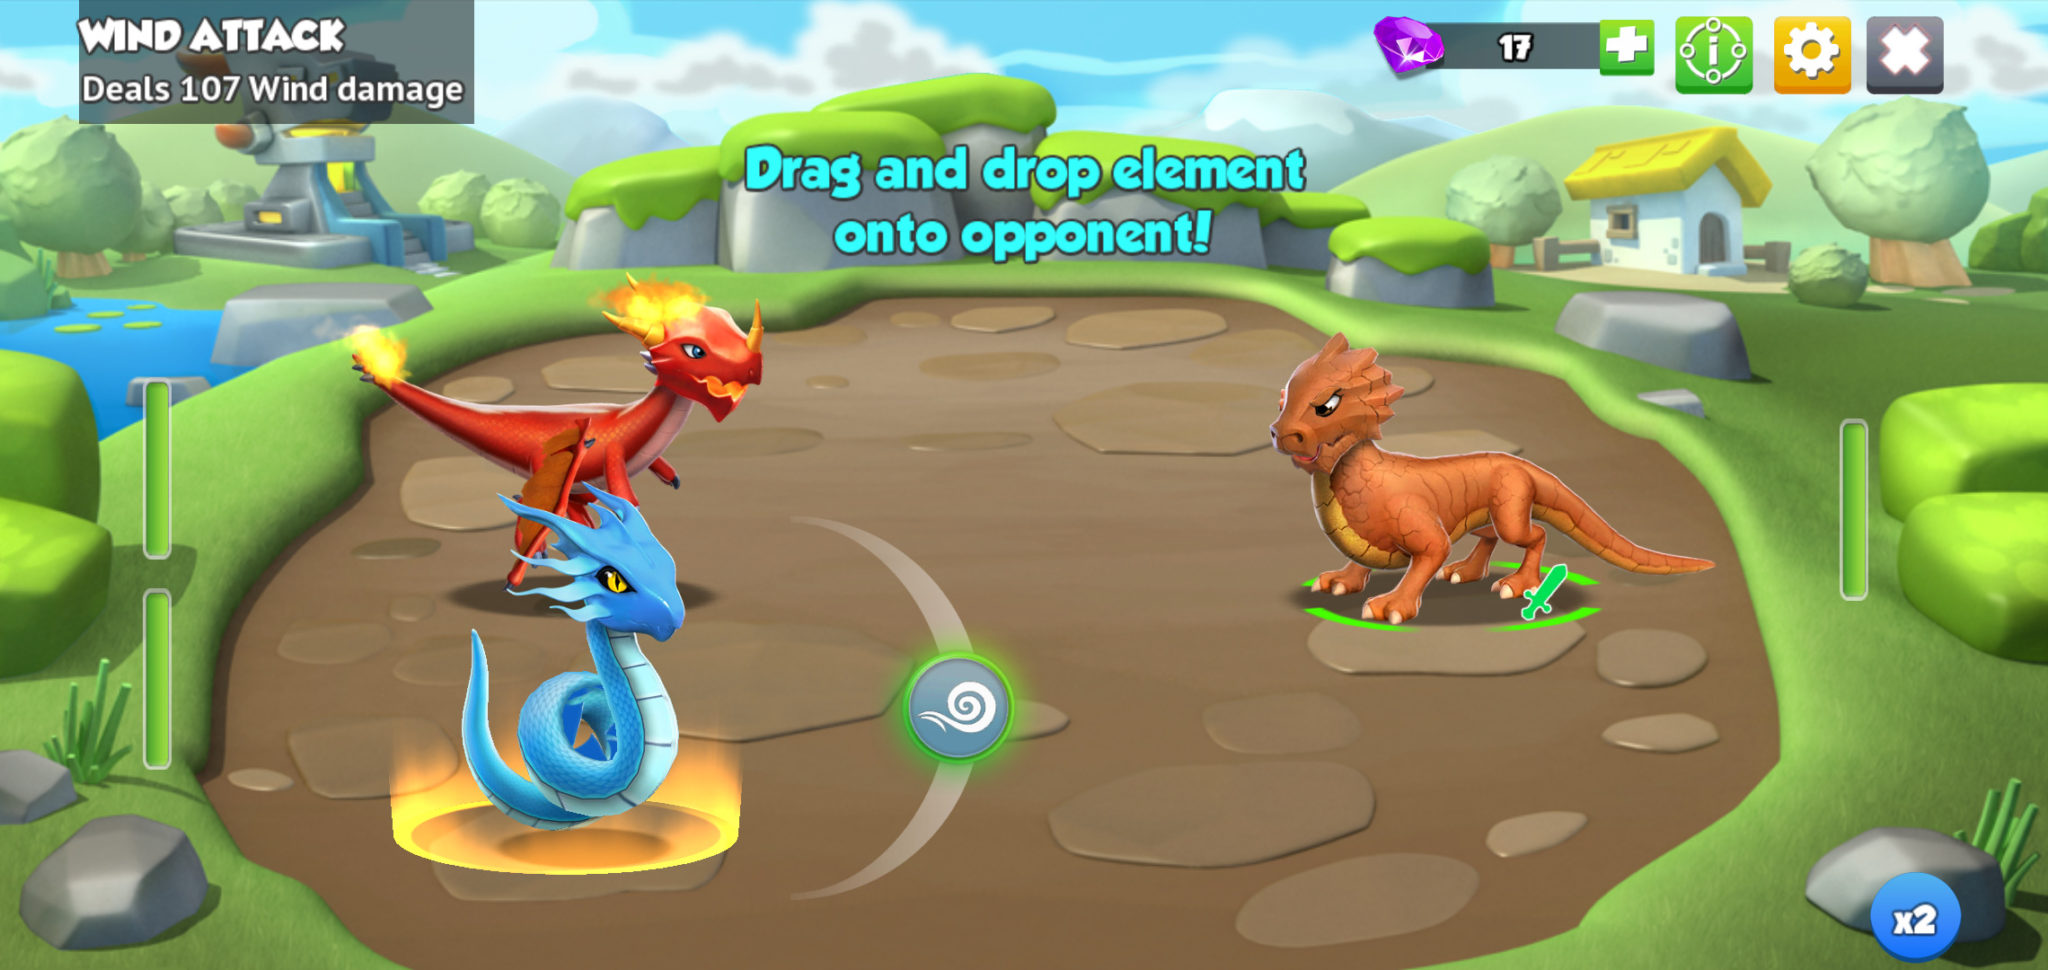 dragon mania legends update new features